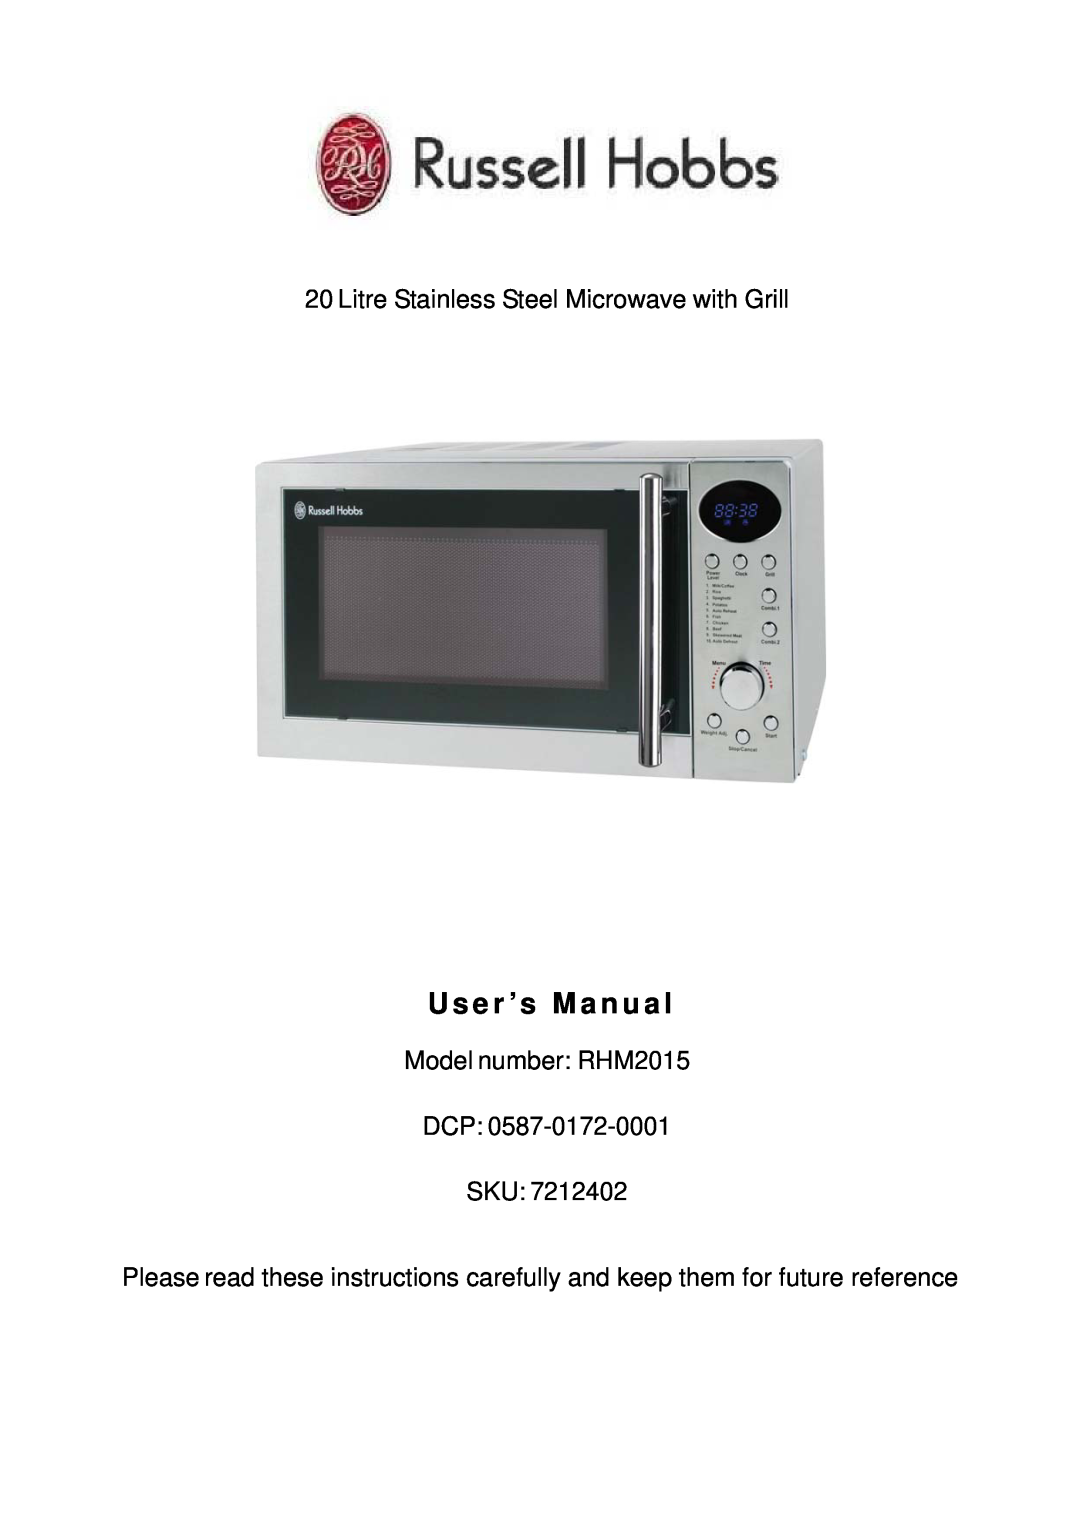 Russell Hobbs RHM2015 user manual Use r ’s Manual, Litre Stainless Steel Microwave with Grill 